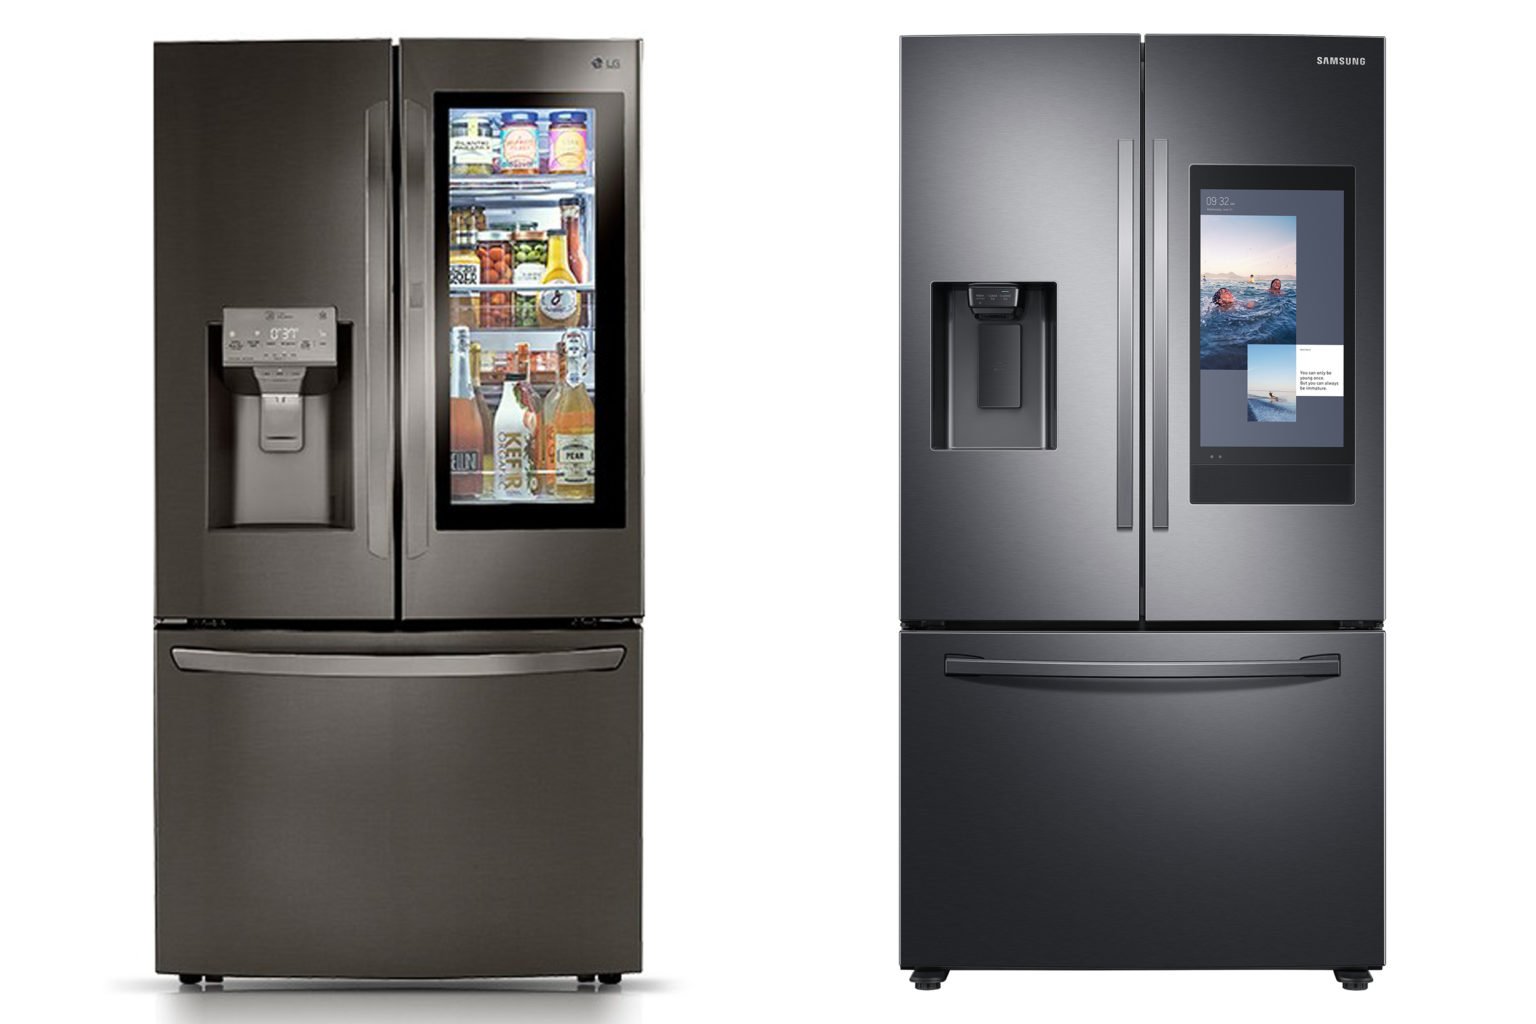 Amazon is working on an advanced smart refrigerator